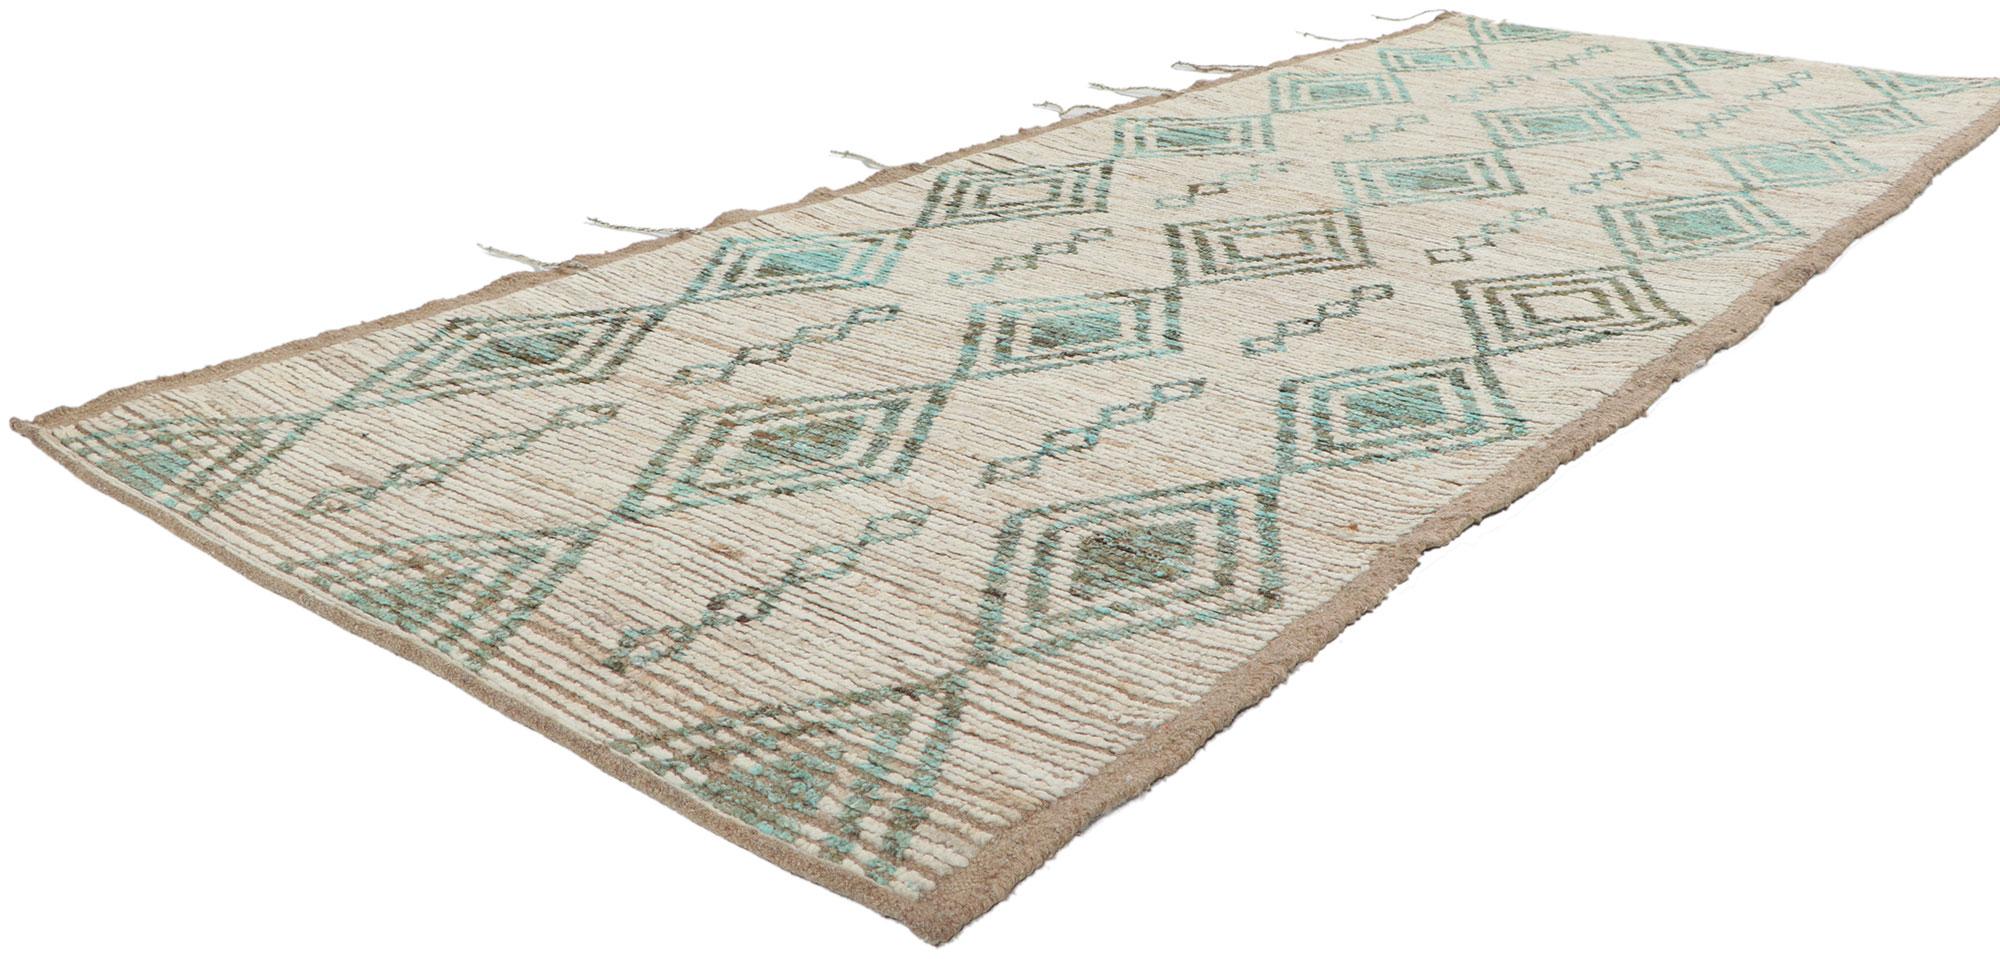 ?80769 New Contemporary Moroccan Style runner, 03'07 x 09'04. With its ?modern style?, incredible detail and texture, this hand knotted wool contemporary runner is a captivating vision of woven beauty. The tribal pattern and earthy colorway woven